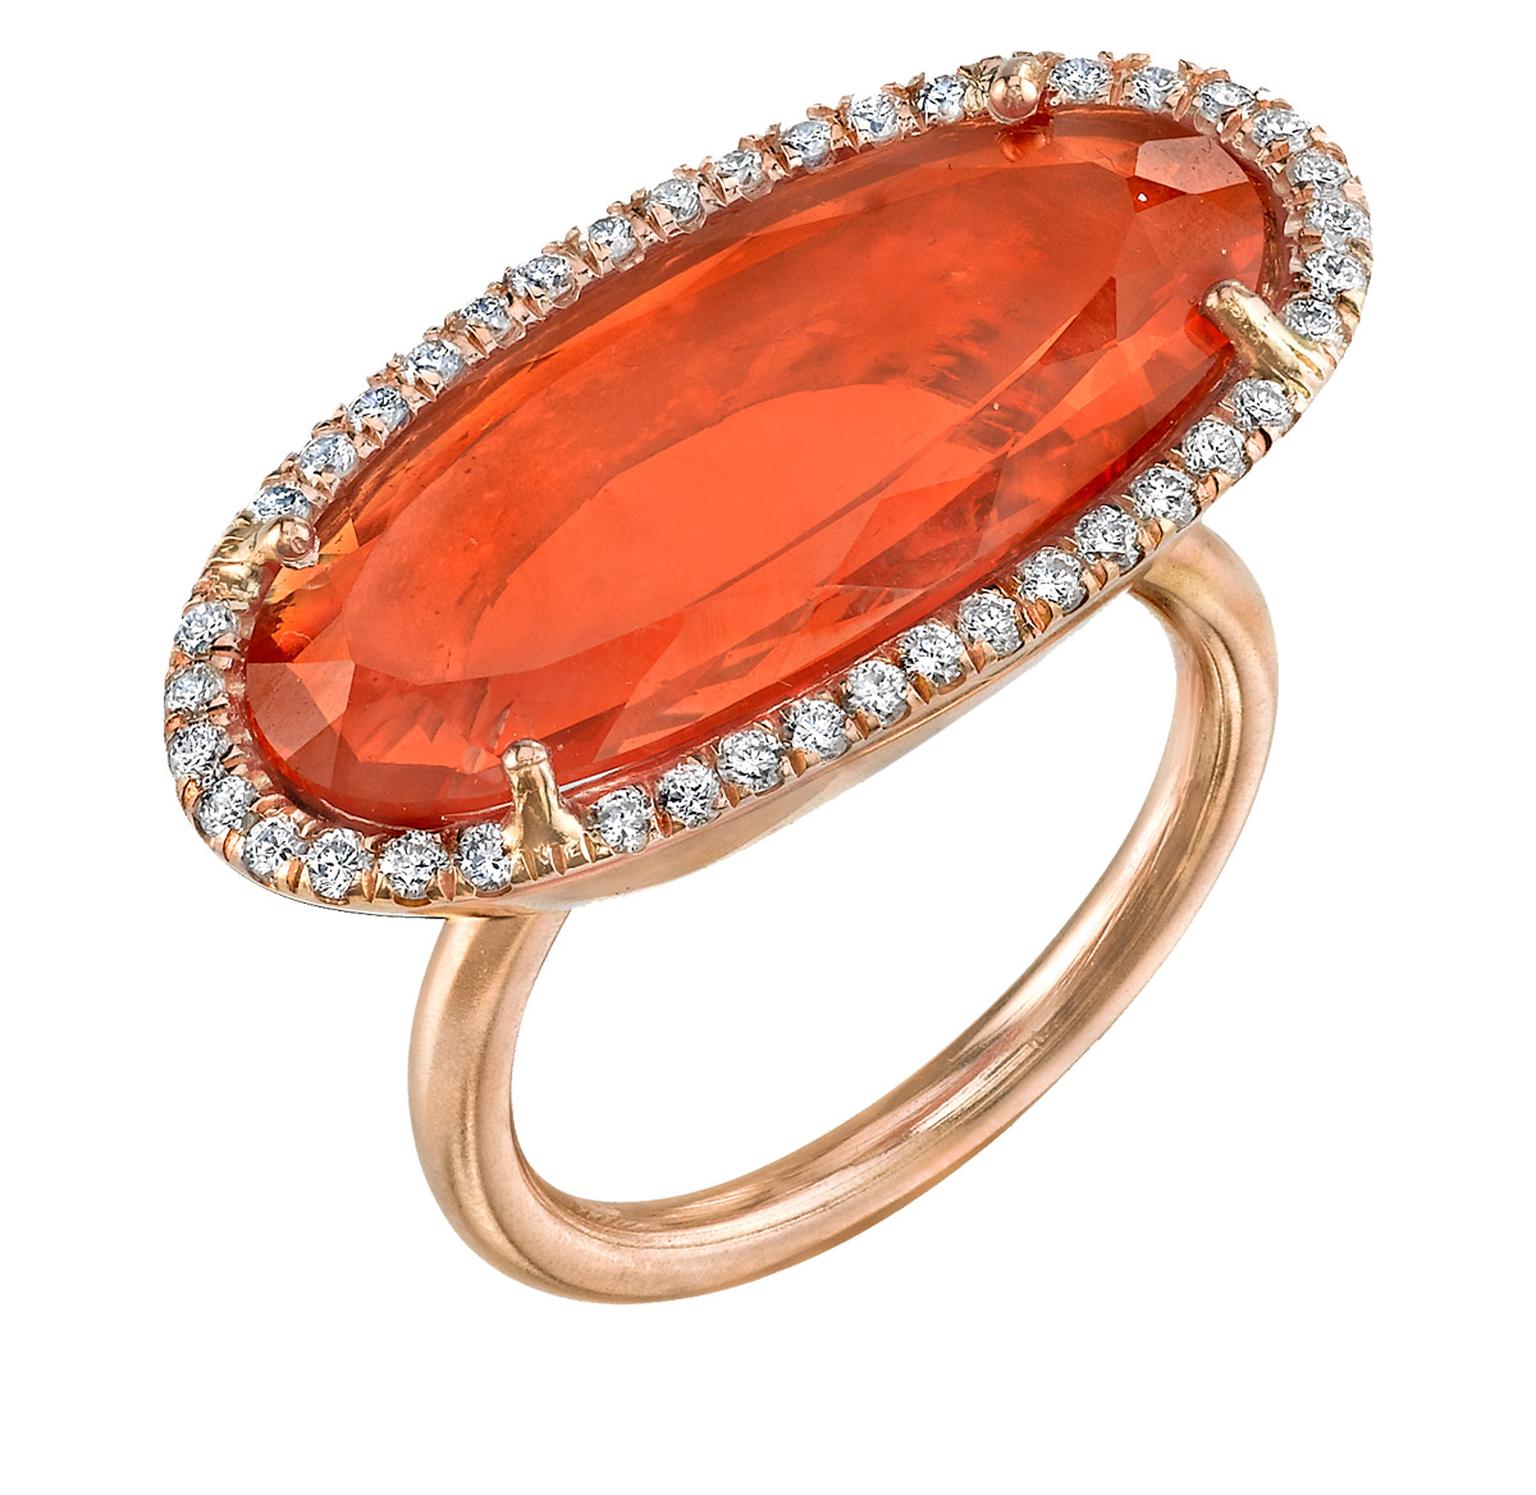 Irene Neuwirth ring in rose gold with a Mexican fire opal surrounded by diamond pave_20131227_Zoom